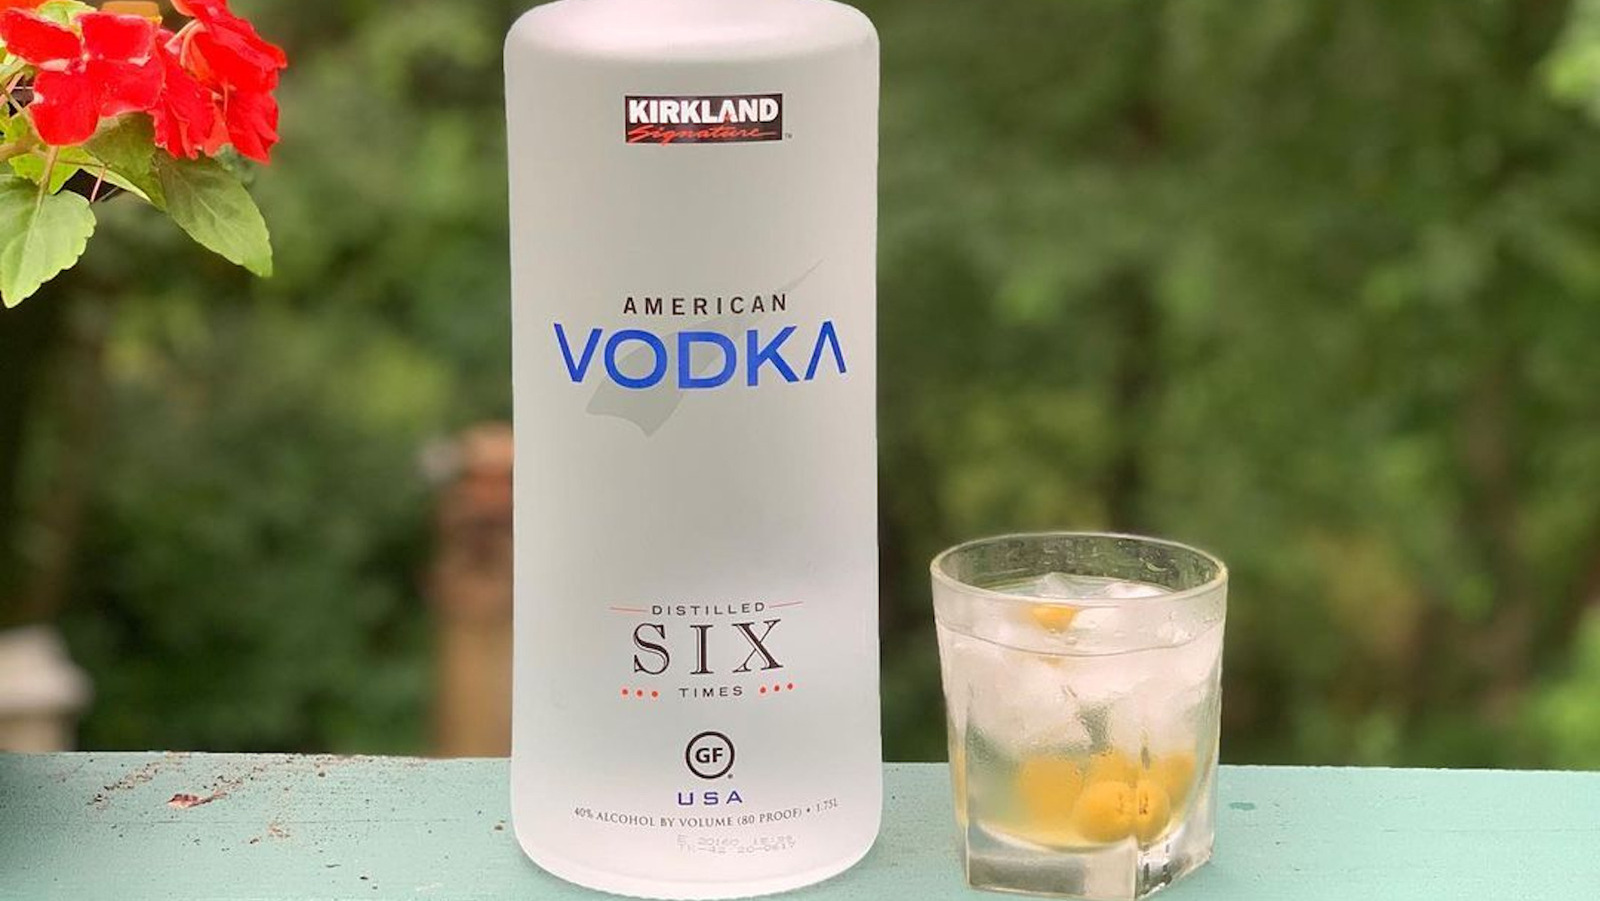 Why Reddit Is Saying Costco's Kirkland Vodka Isn't What It Used To Be